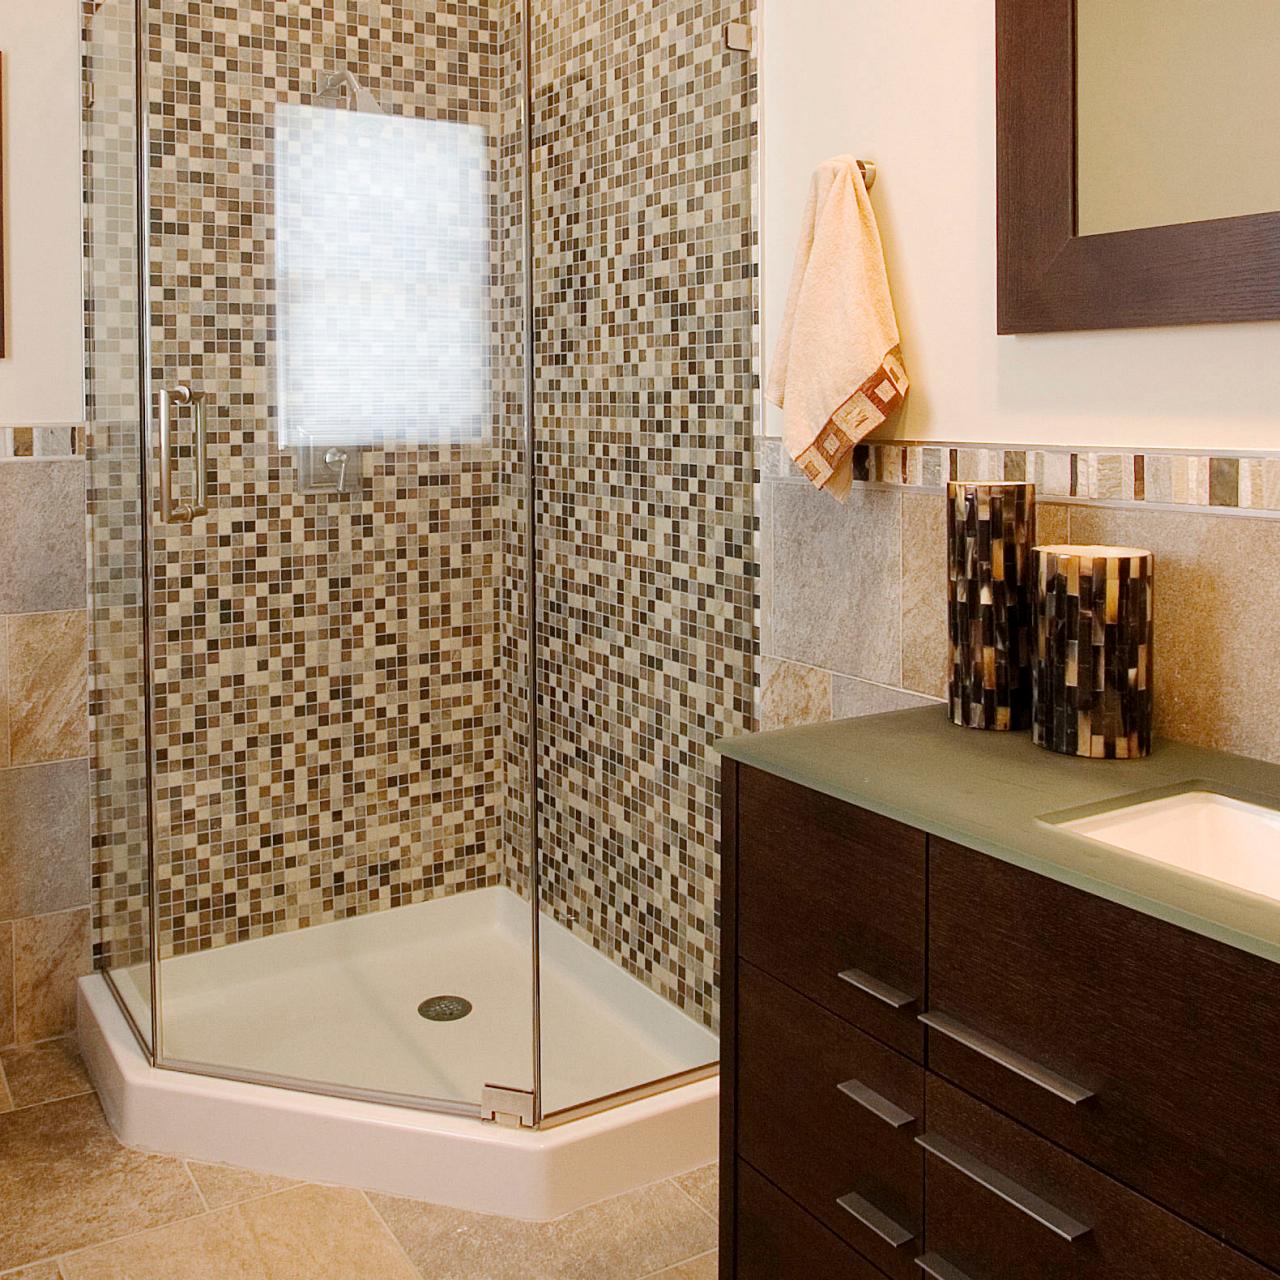 12 Items to Add to Your Dream Bathroom Wish List - New Hampshire Home  Magazine